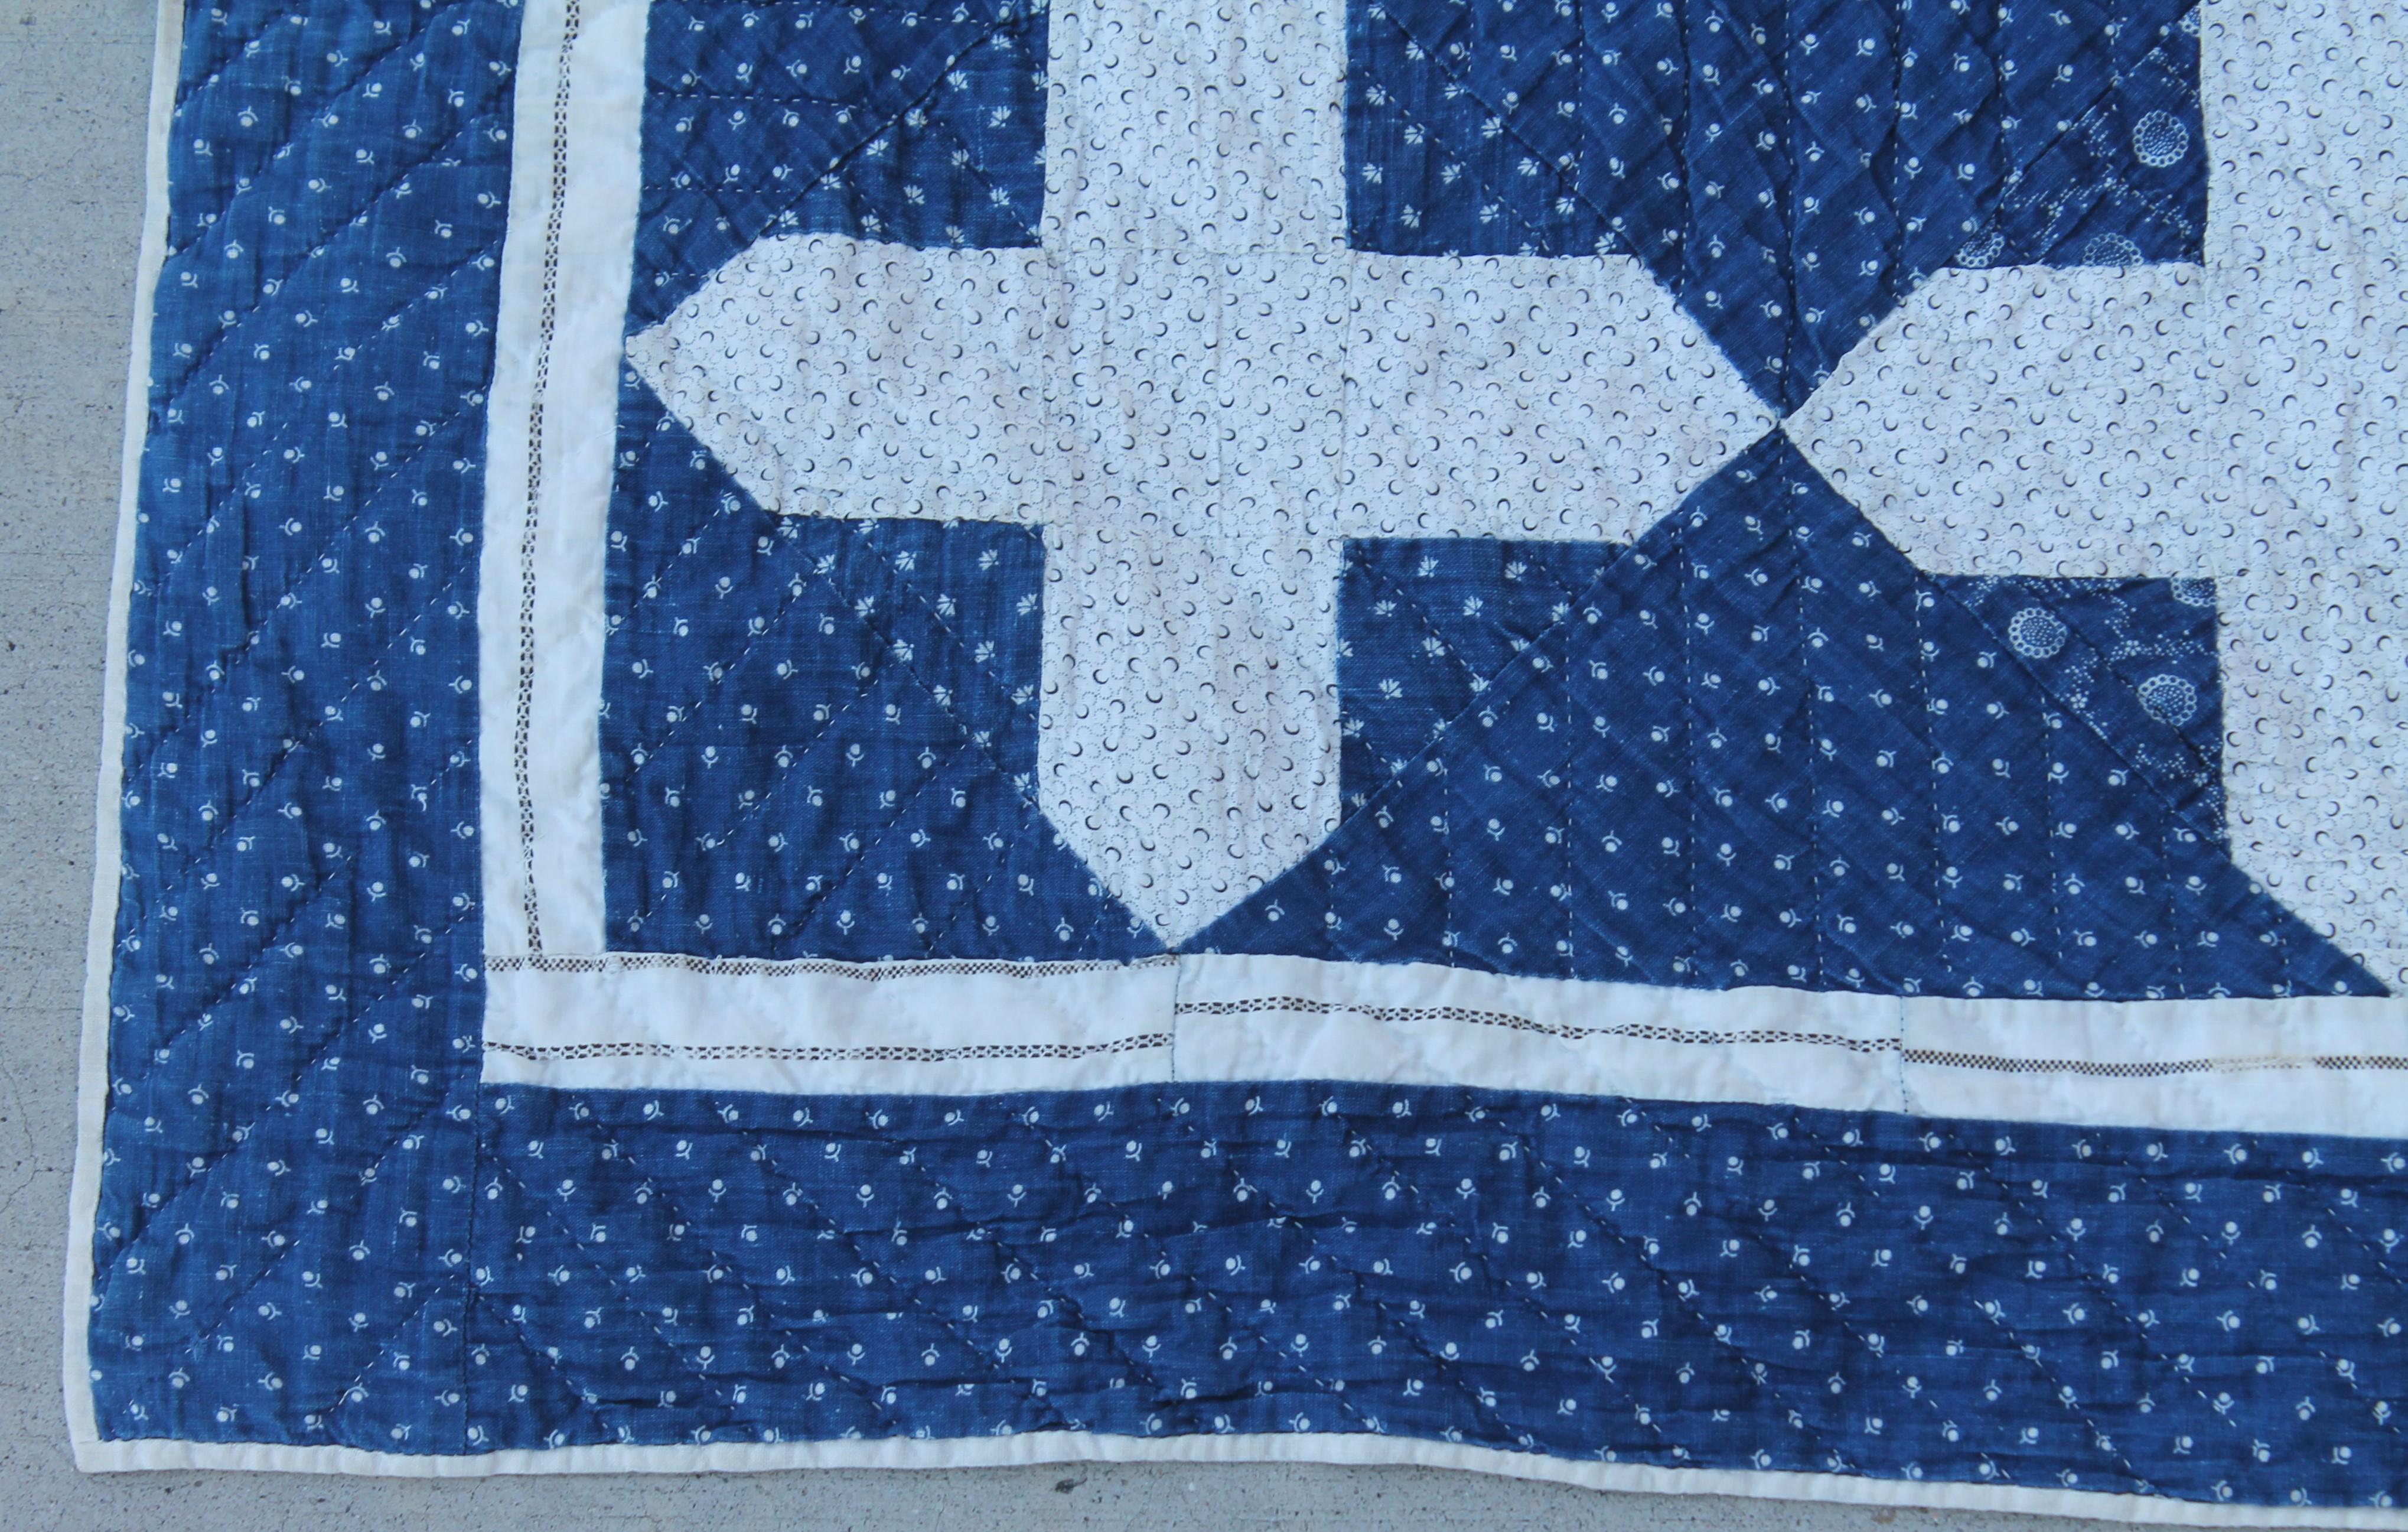 American Early Antique Quilt, 19th Century Blue and White Calico Quilt